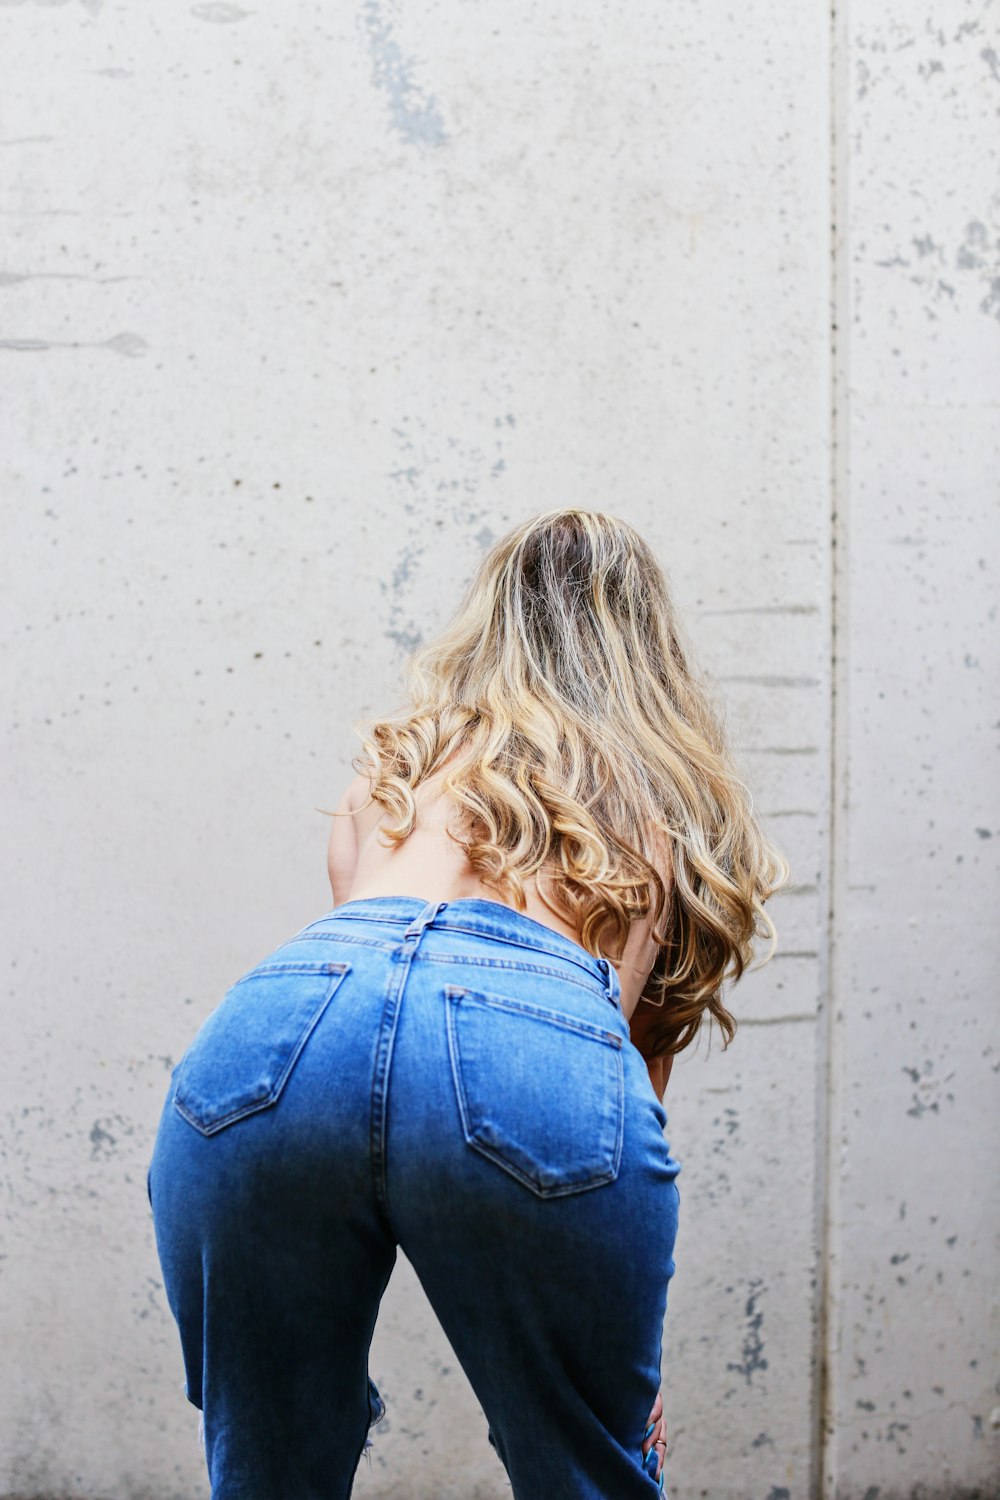 1500+ Girls Butt In Jeans Pictures | Download Free Images on Unsplash